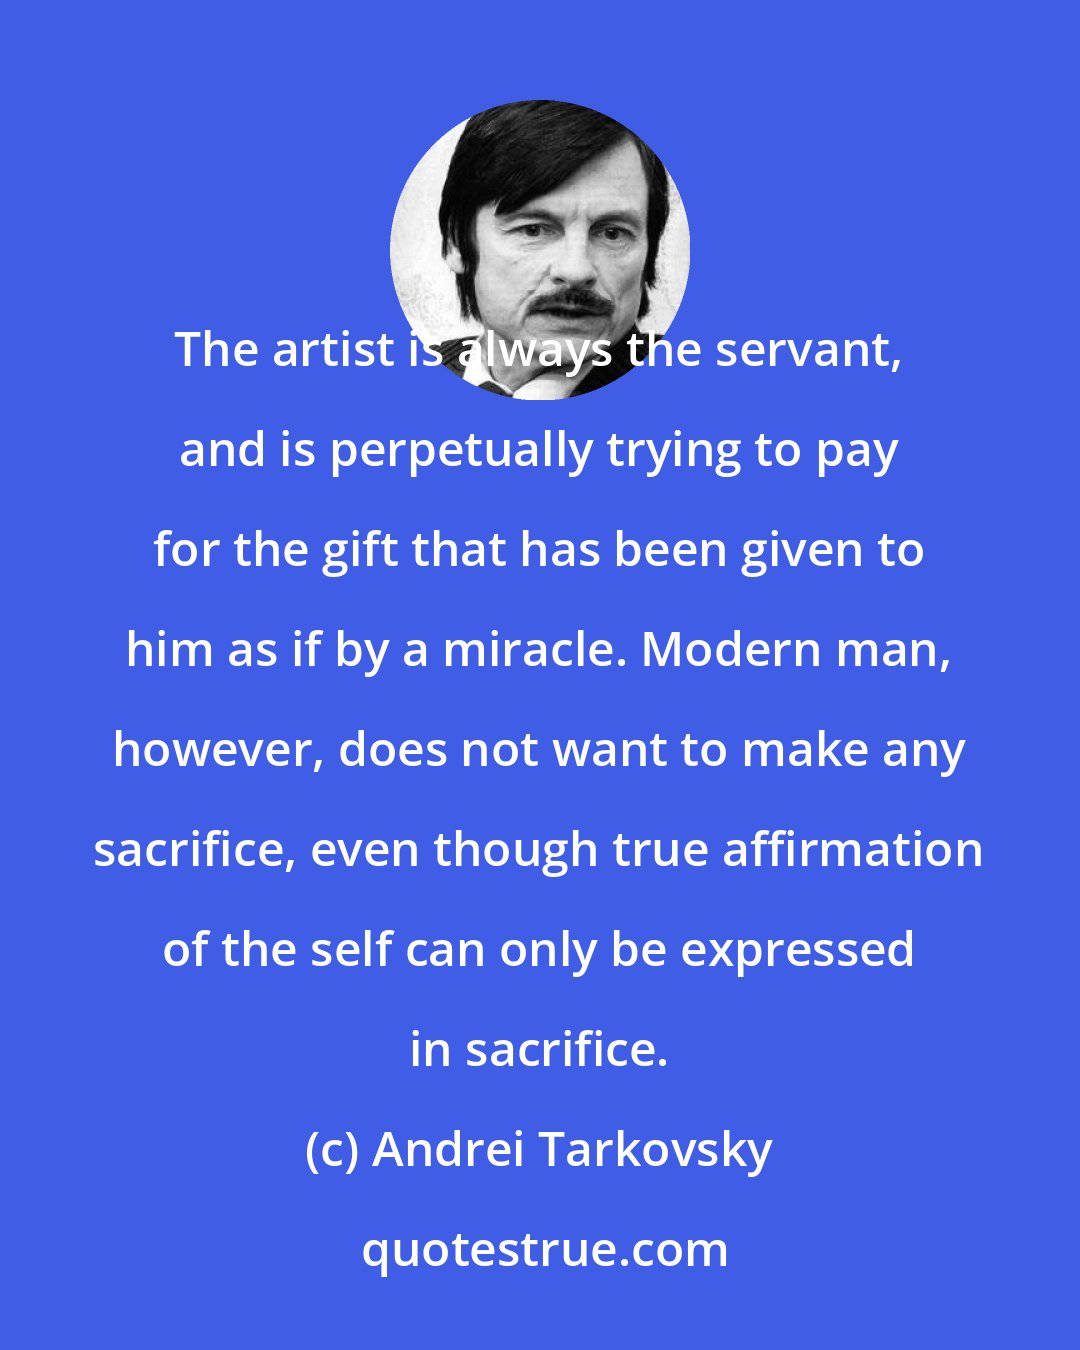 Andrei Tarkovsky: The artist is always the servant, and is perpetually trying to pay for the gift that has been given to him as if by a miracle. Modern man, however, does not want to make any sacrifice, even though true affirmation of the self can only be expressed in sacrifice.